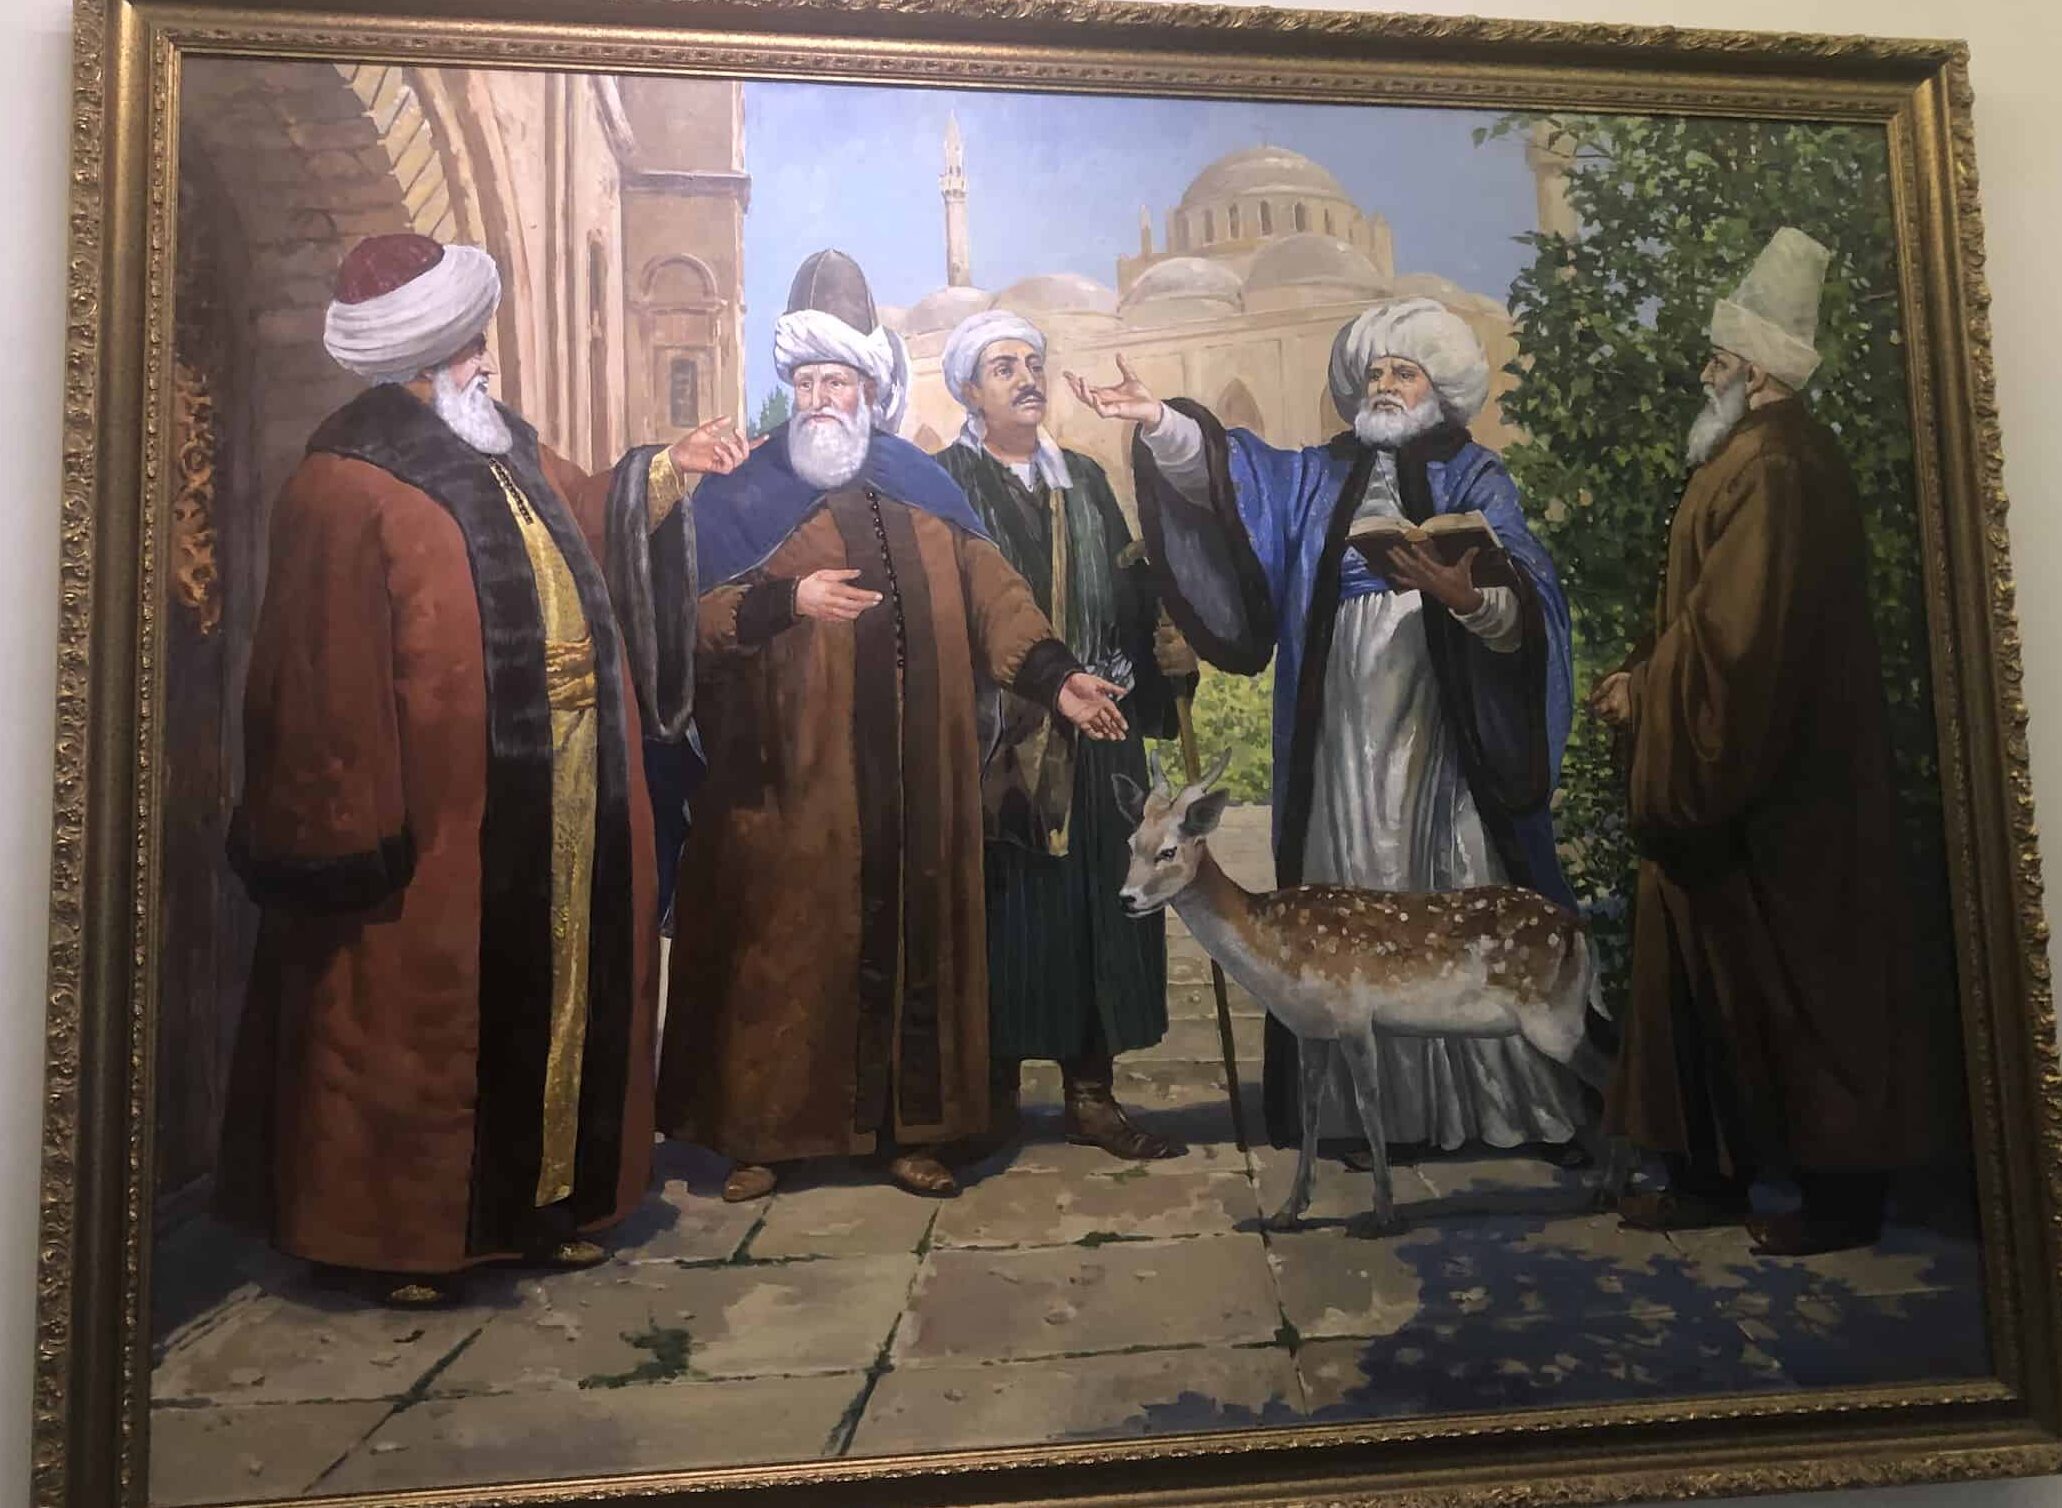 Seljuk contributions to philosophy and thought in the Seljuk Hall